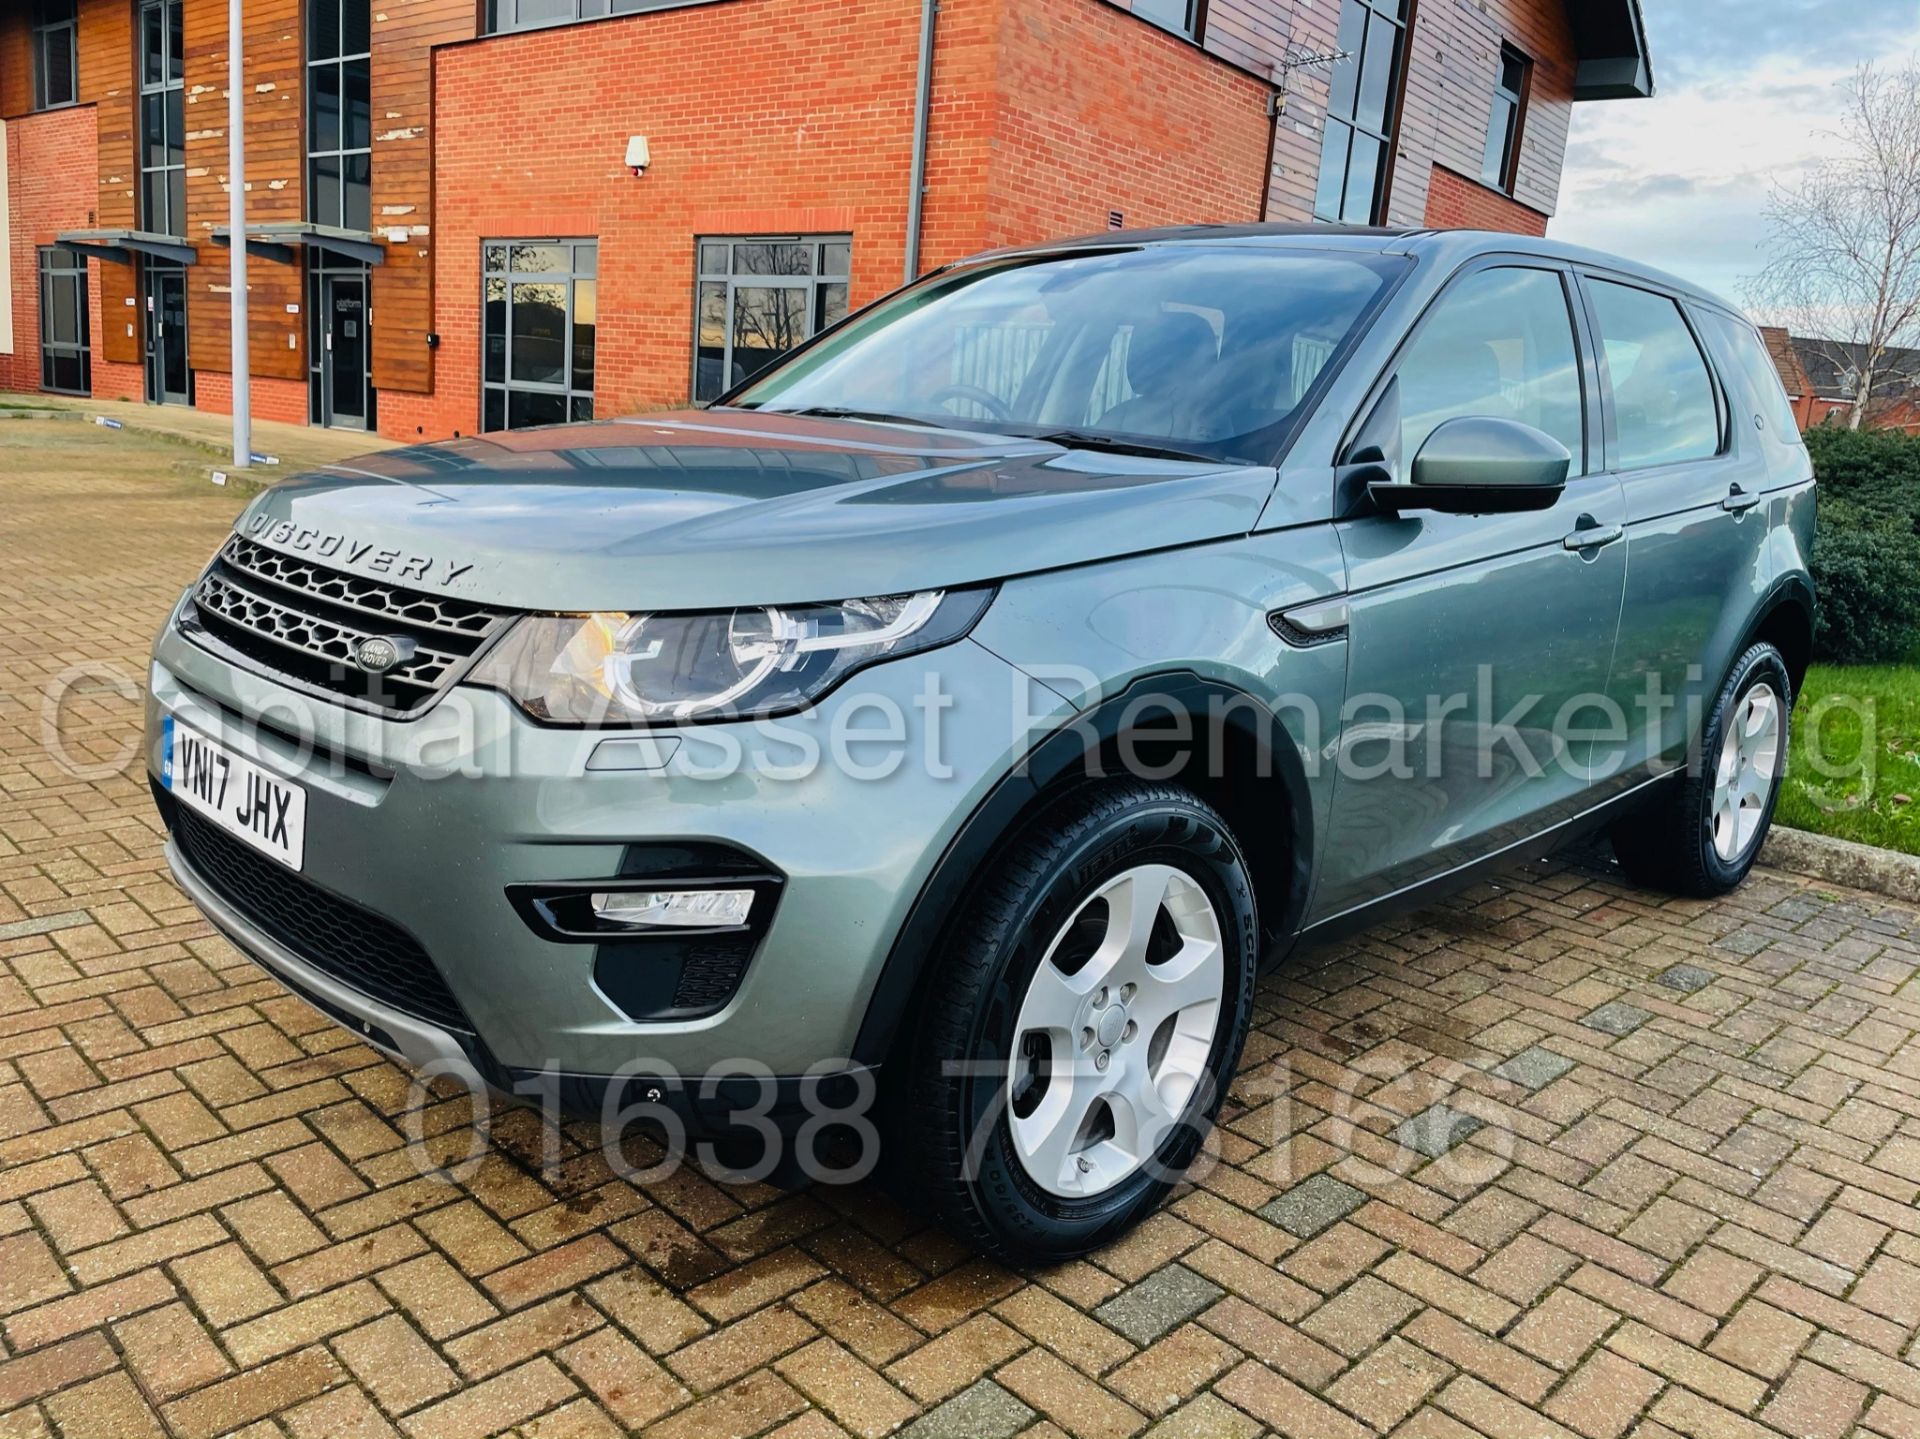 (On Sale) LAND ROVER DISCOVERY SPORT *SE TECH* SUV (2017) '2.0 TD4 - STOP/START' (1 OWNER FROM NEW) - Image 5 of 50